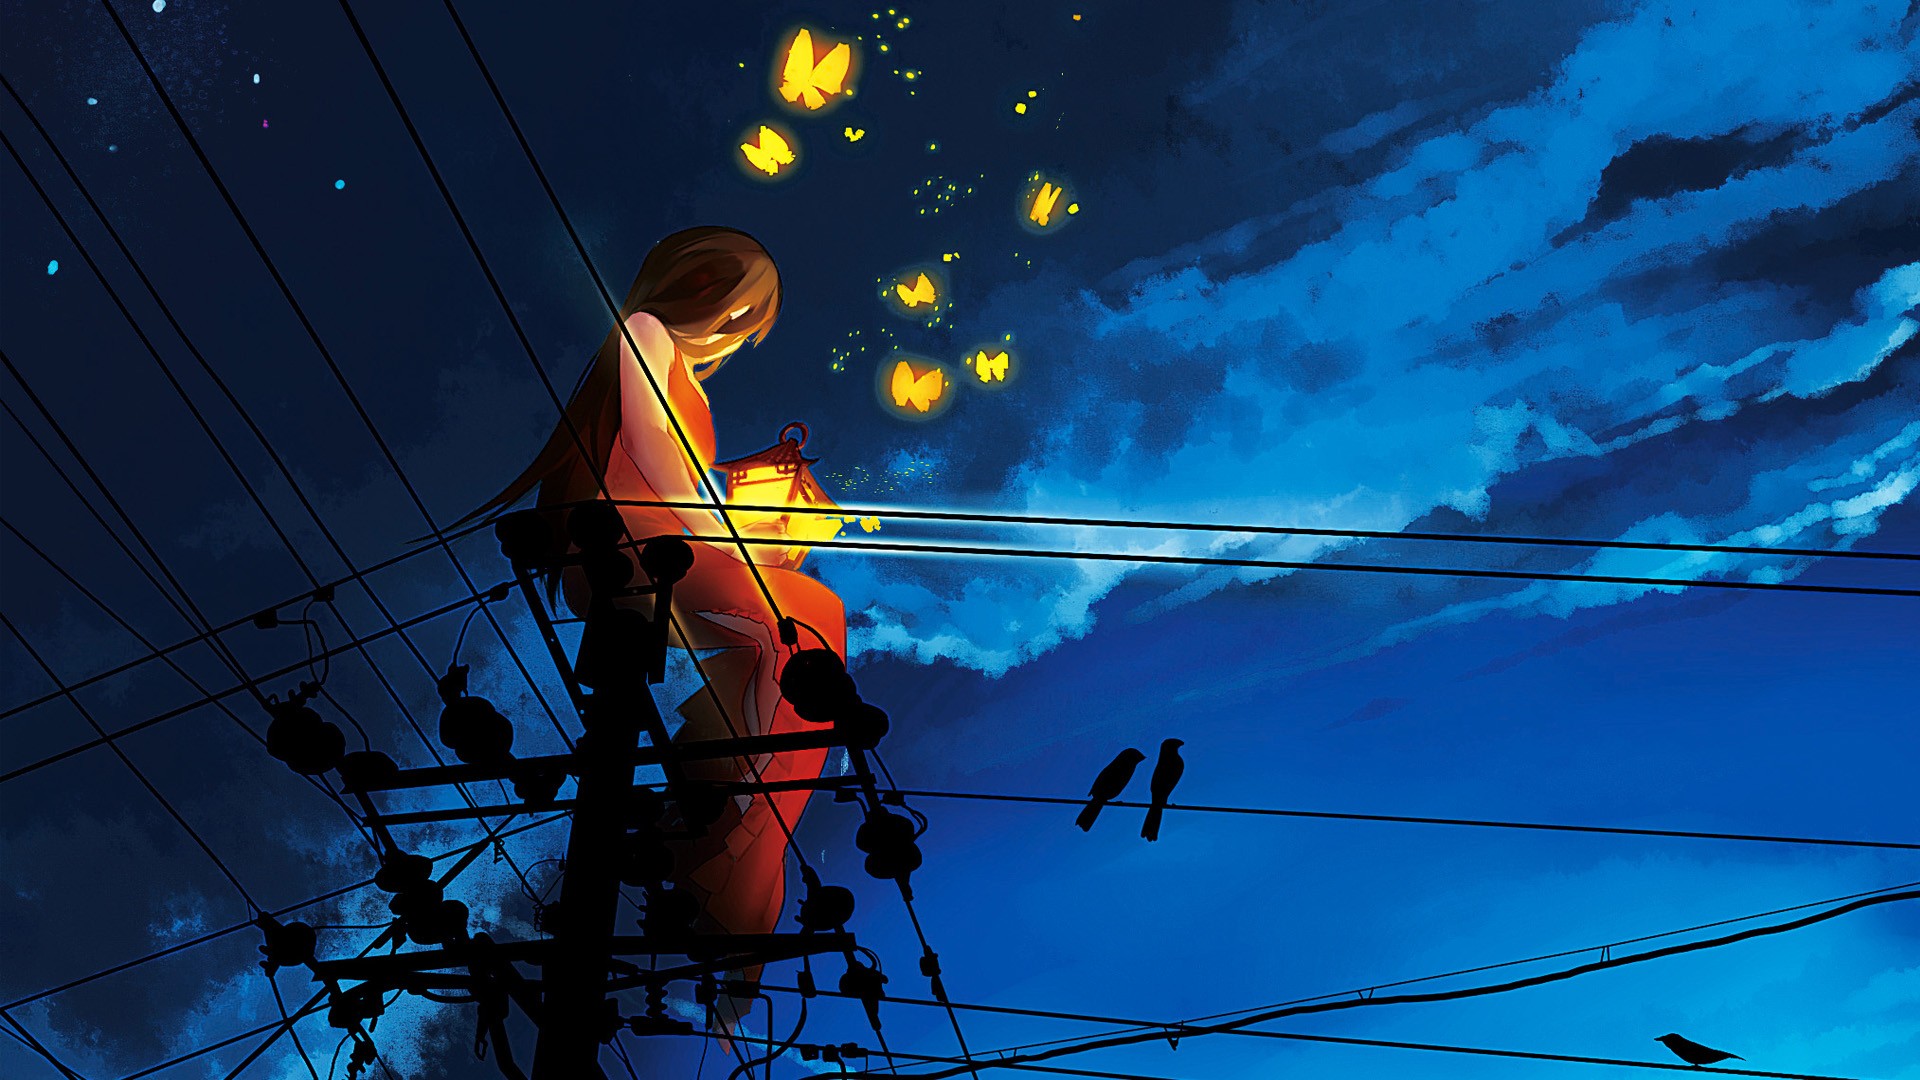 Anime 1920x1080 butterfly utility pole sunset original characters sitting power lines silhouette birds lantern women outdoors animals sky long hair anime anime girls